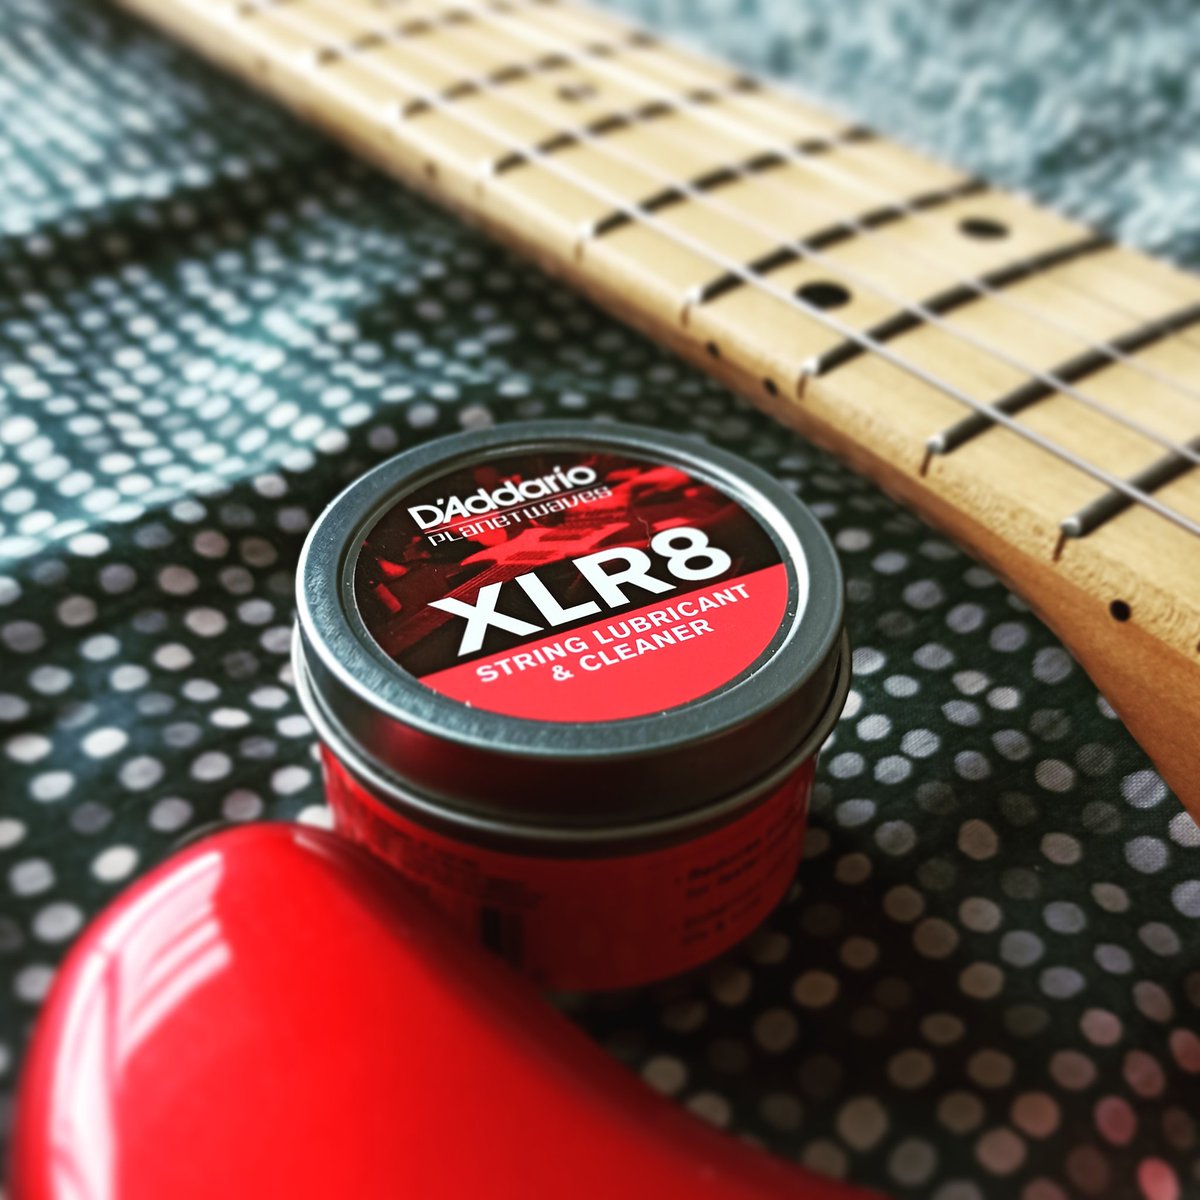 This thing is a must-have! #daddario #xlr8 #daddarioxlr8 #stringlubricant #stringcleaner #planetwaves #guitarmaintenance #madeinusa #guitarcare #squier by #fender #stratocaster